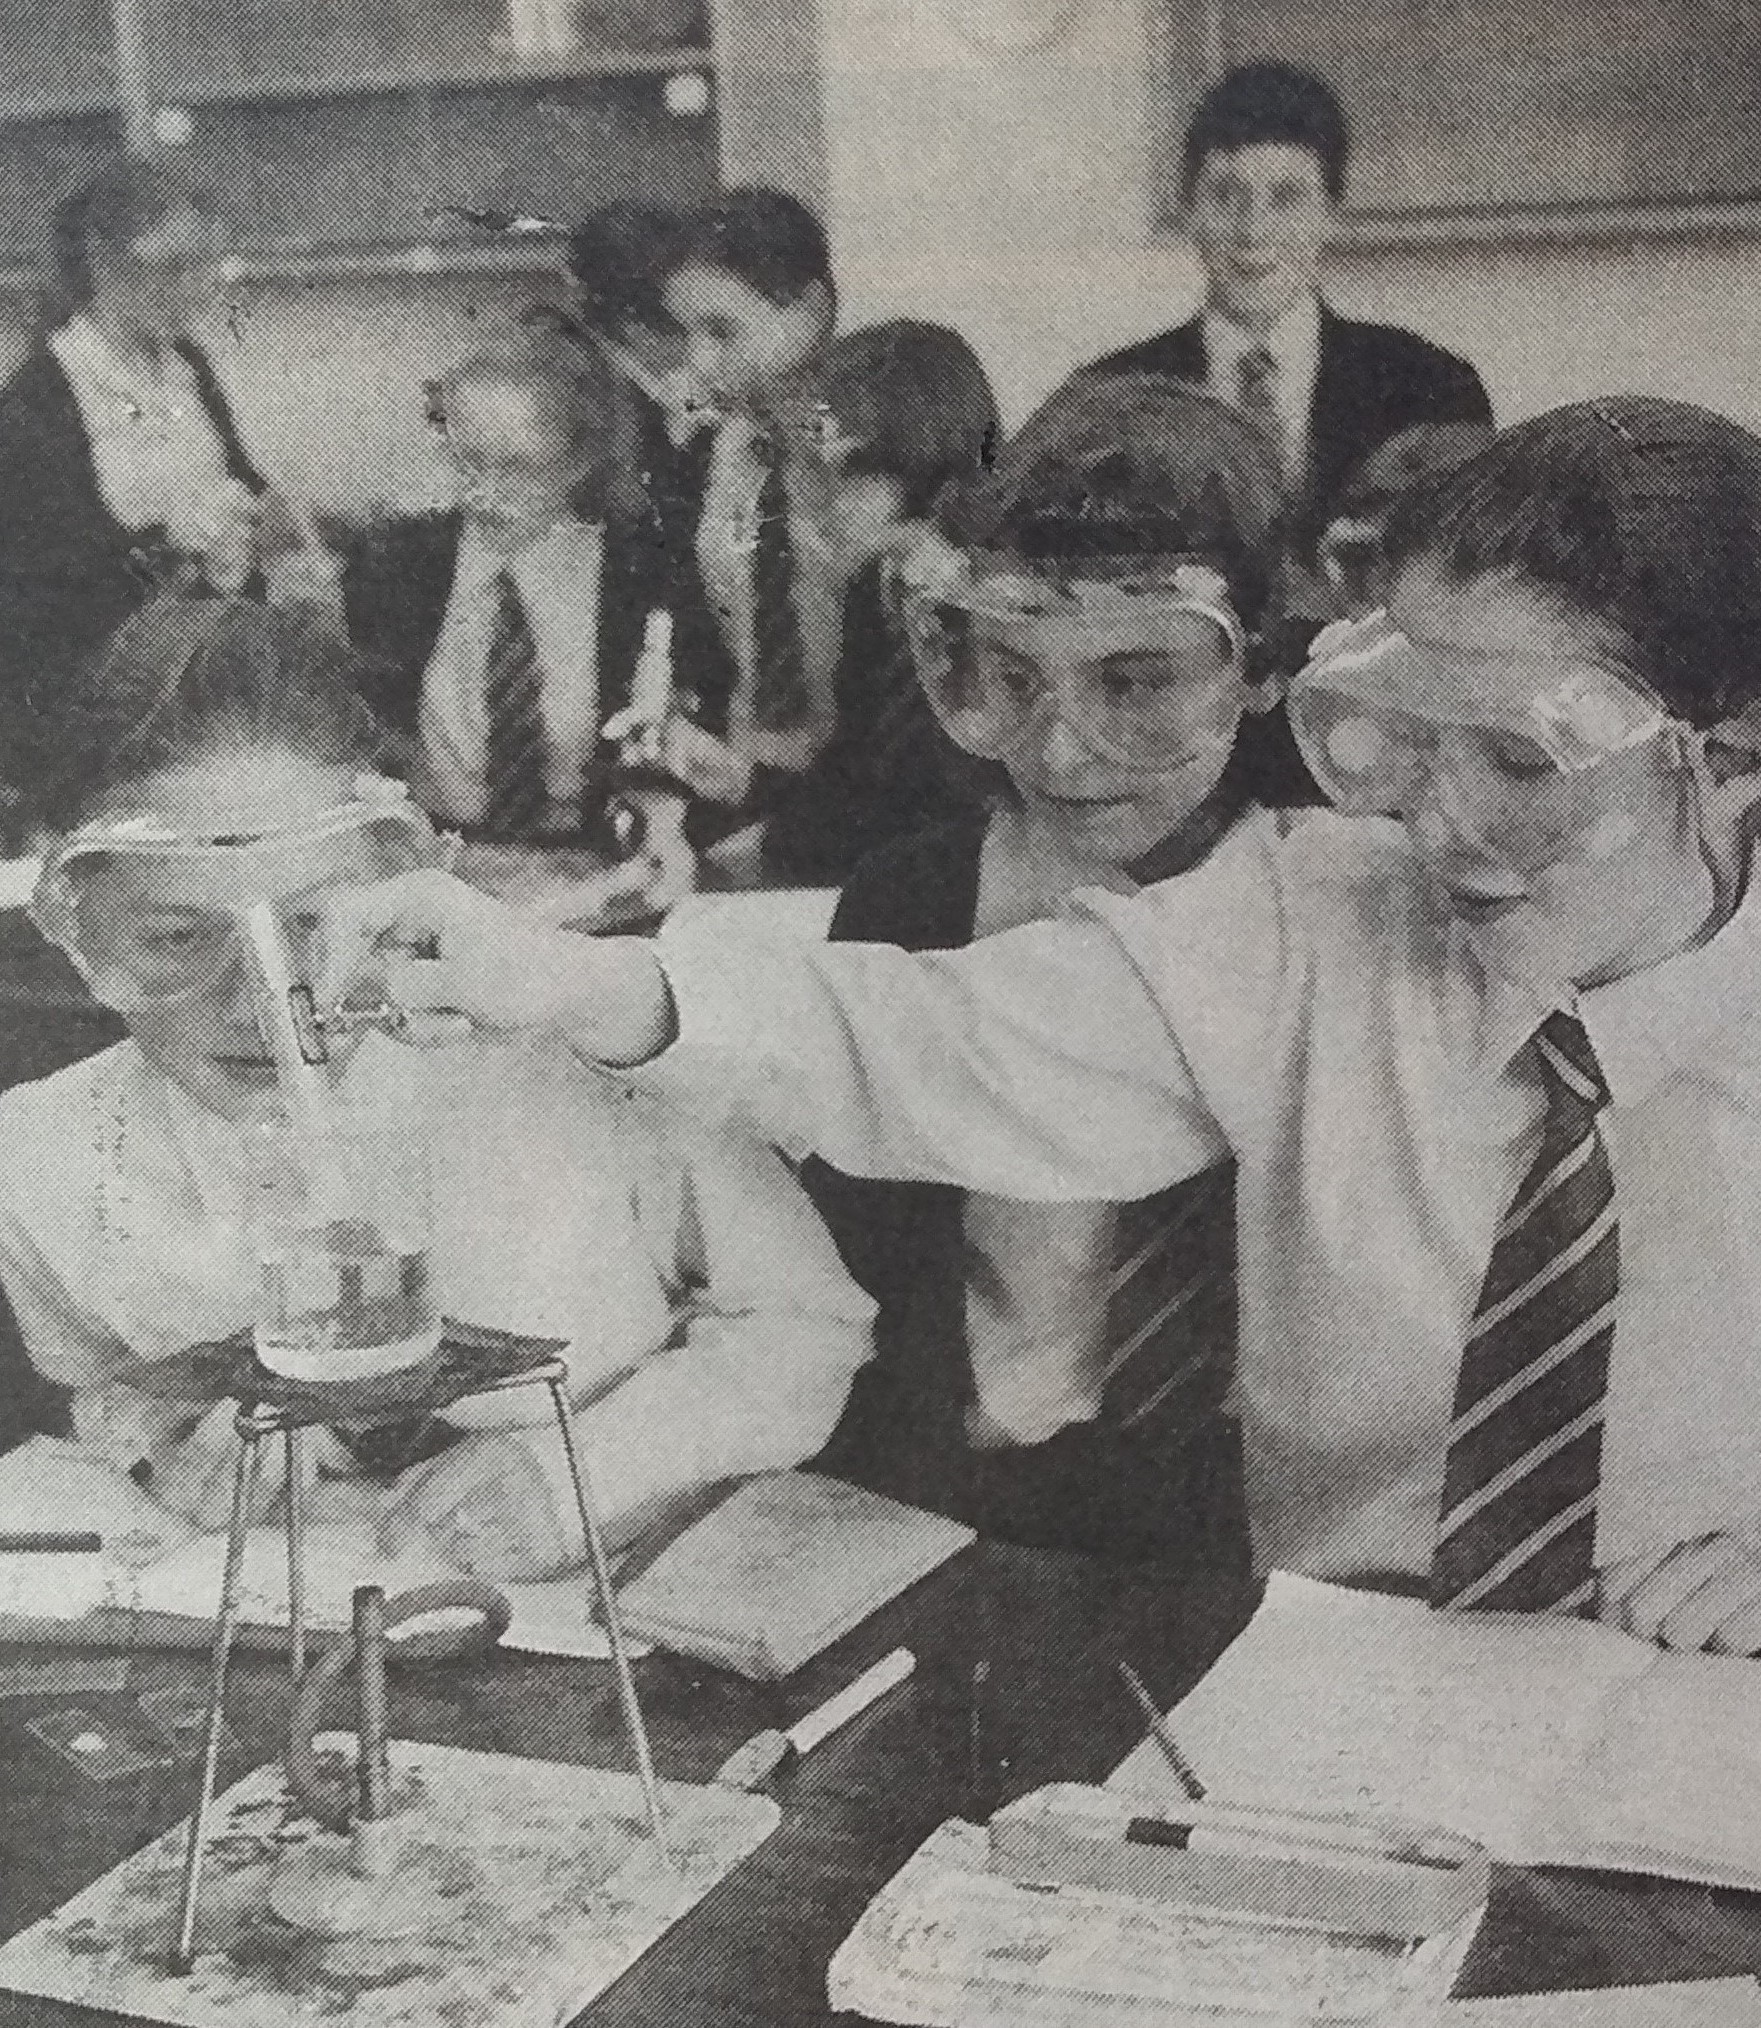 July 1996 and Year Seven pupils are busy in the chemistry classroom